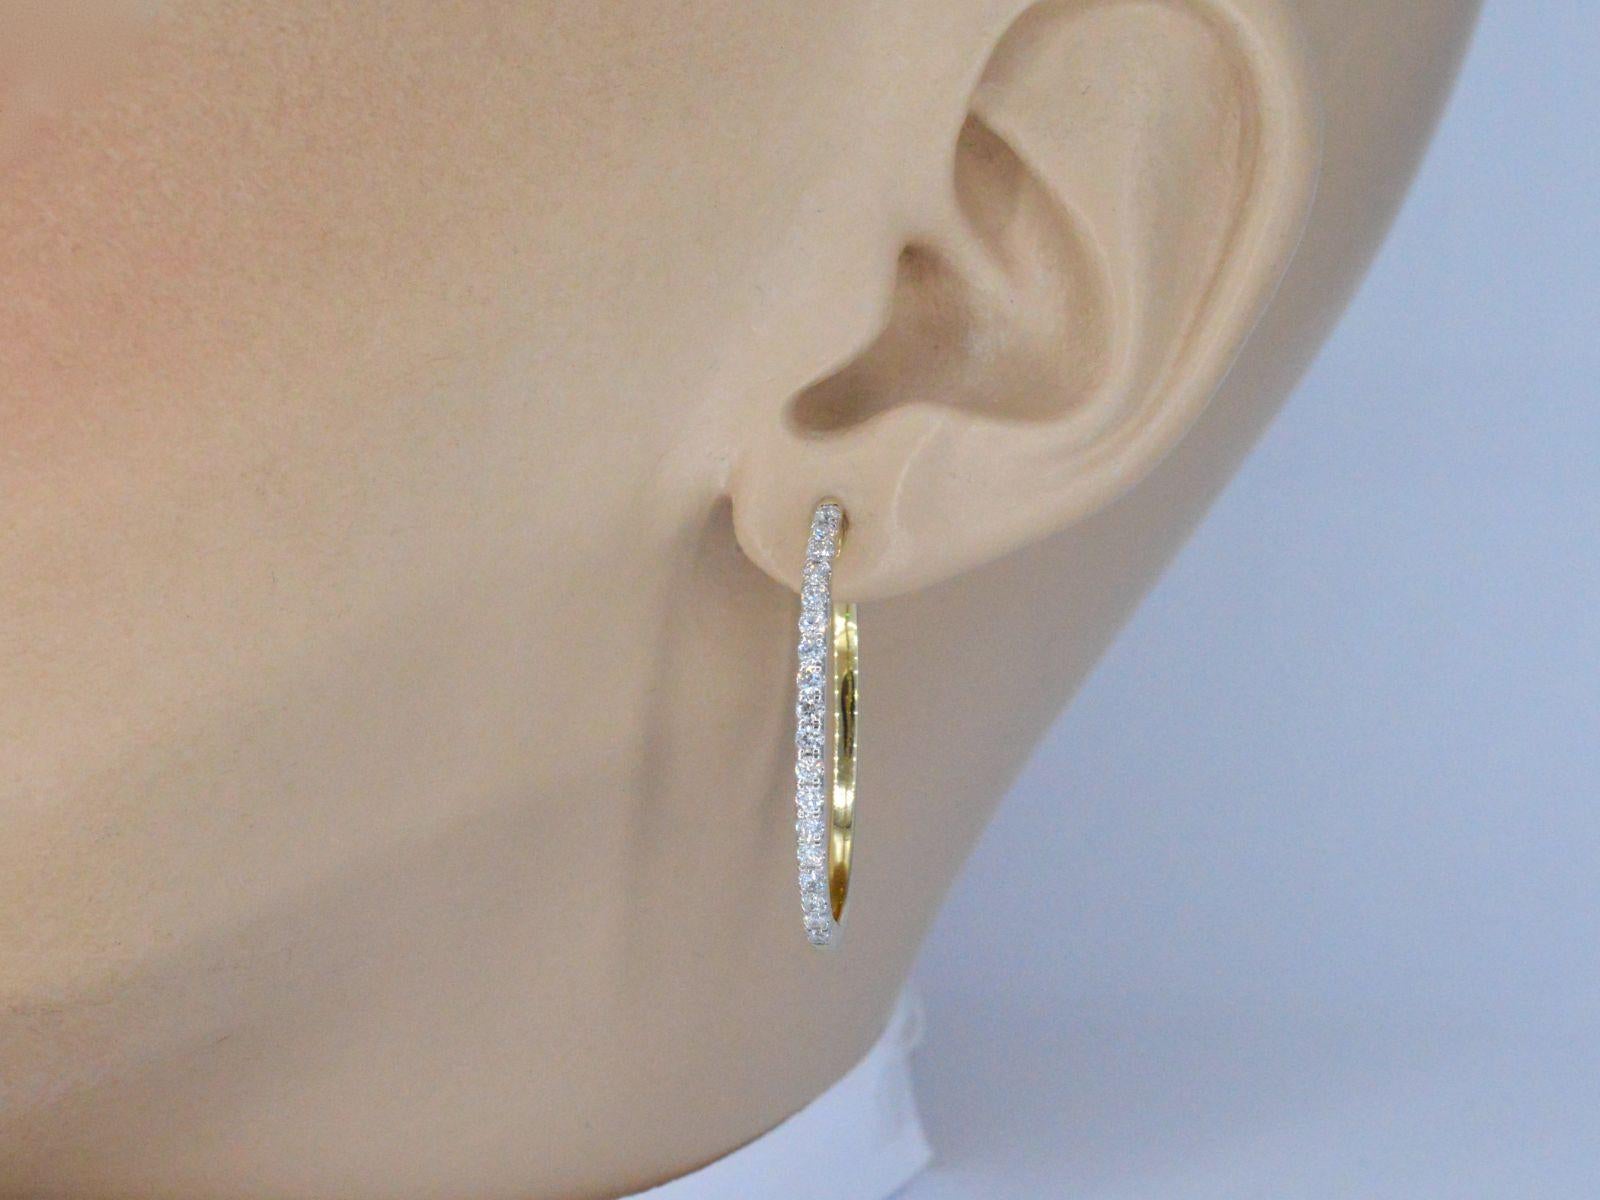 Yellow gold creole earrings with brilliant cut diamonds are a stunning piece of jewelry that feature a classic hoop design made from warm yellow gold. The diamonds used in these earrings are expertly cut to maximize their brilliance and sparkle,